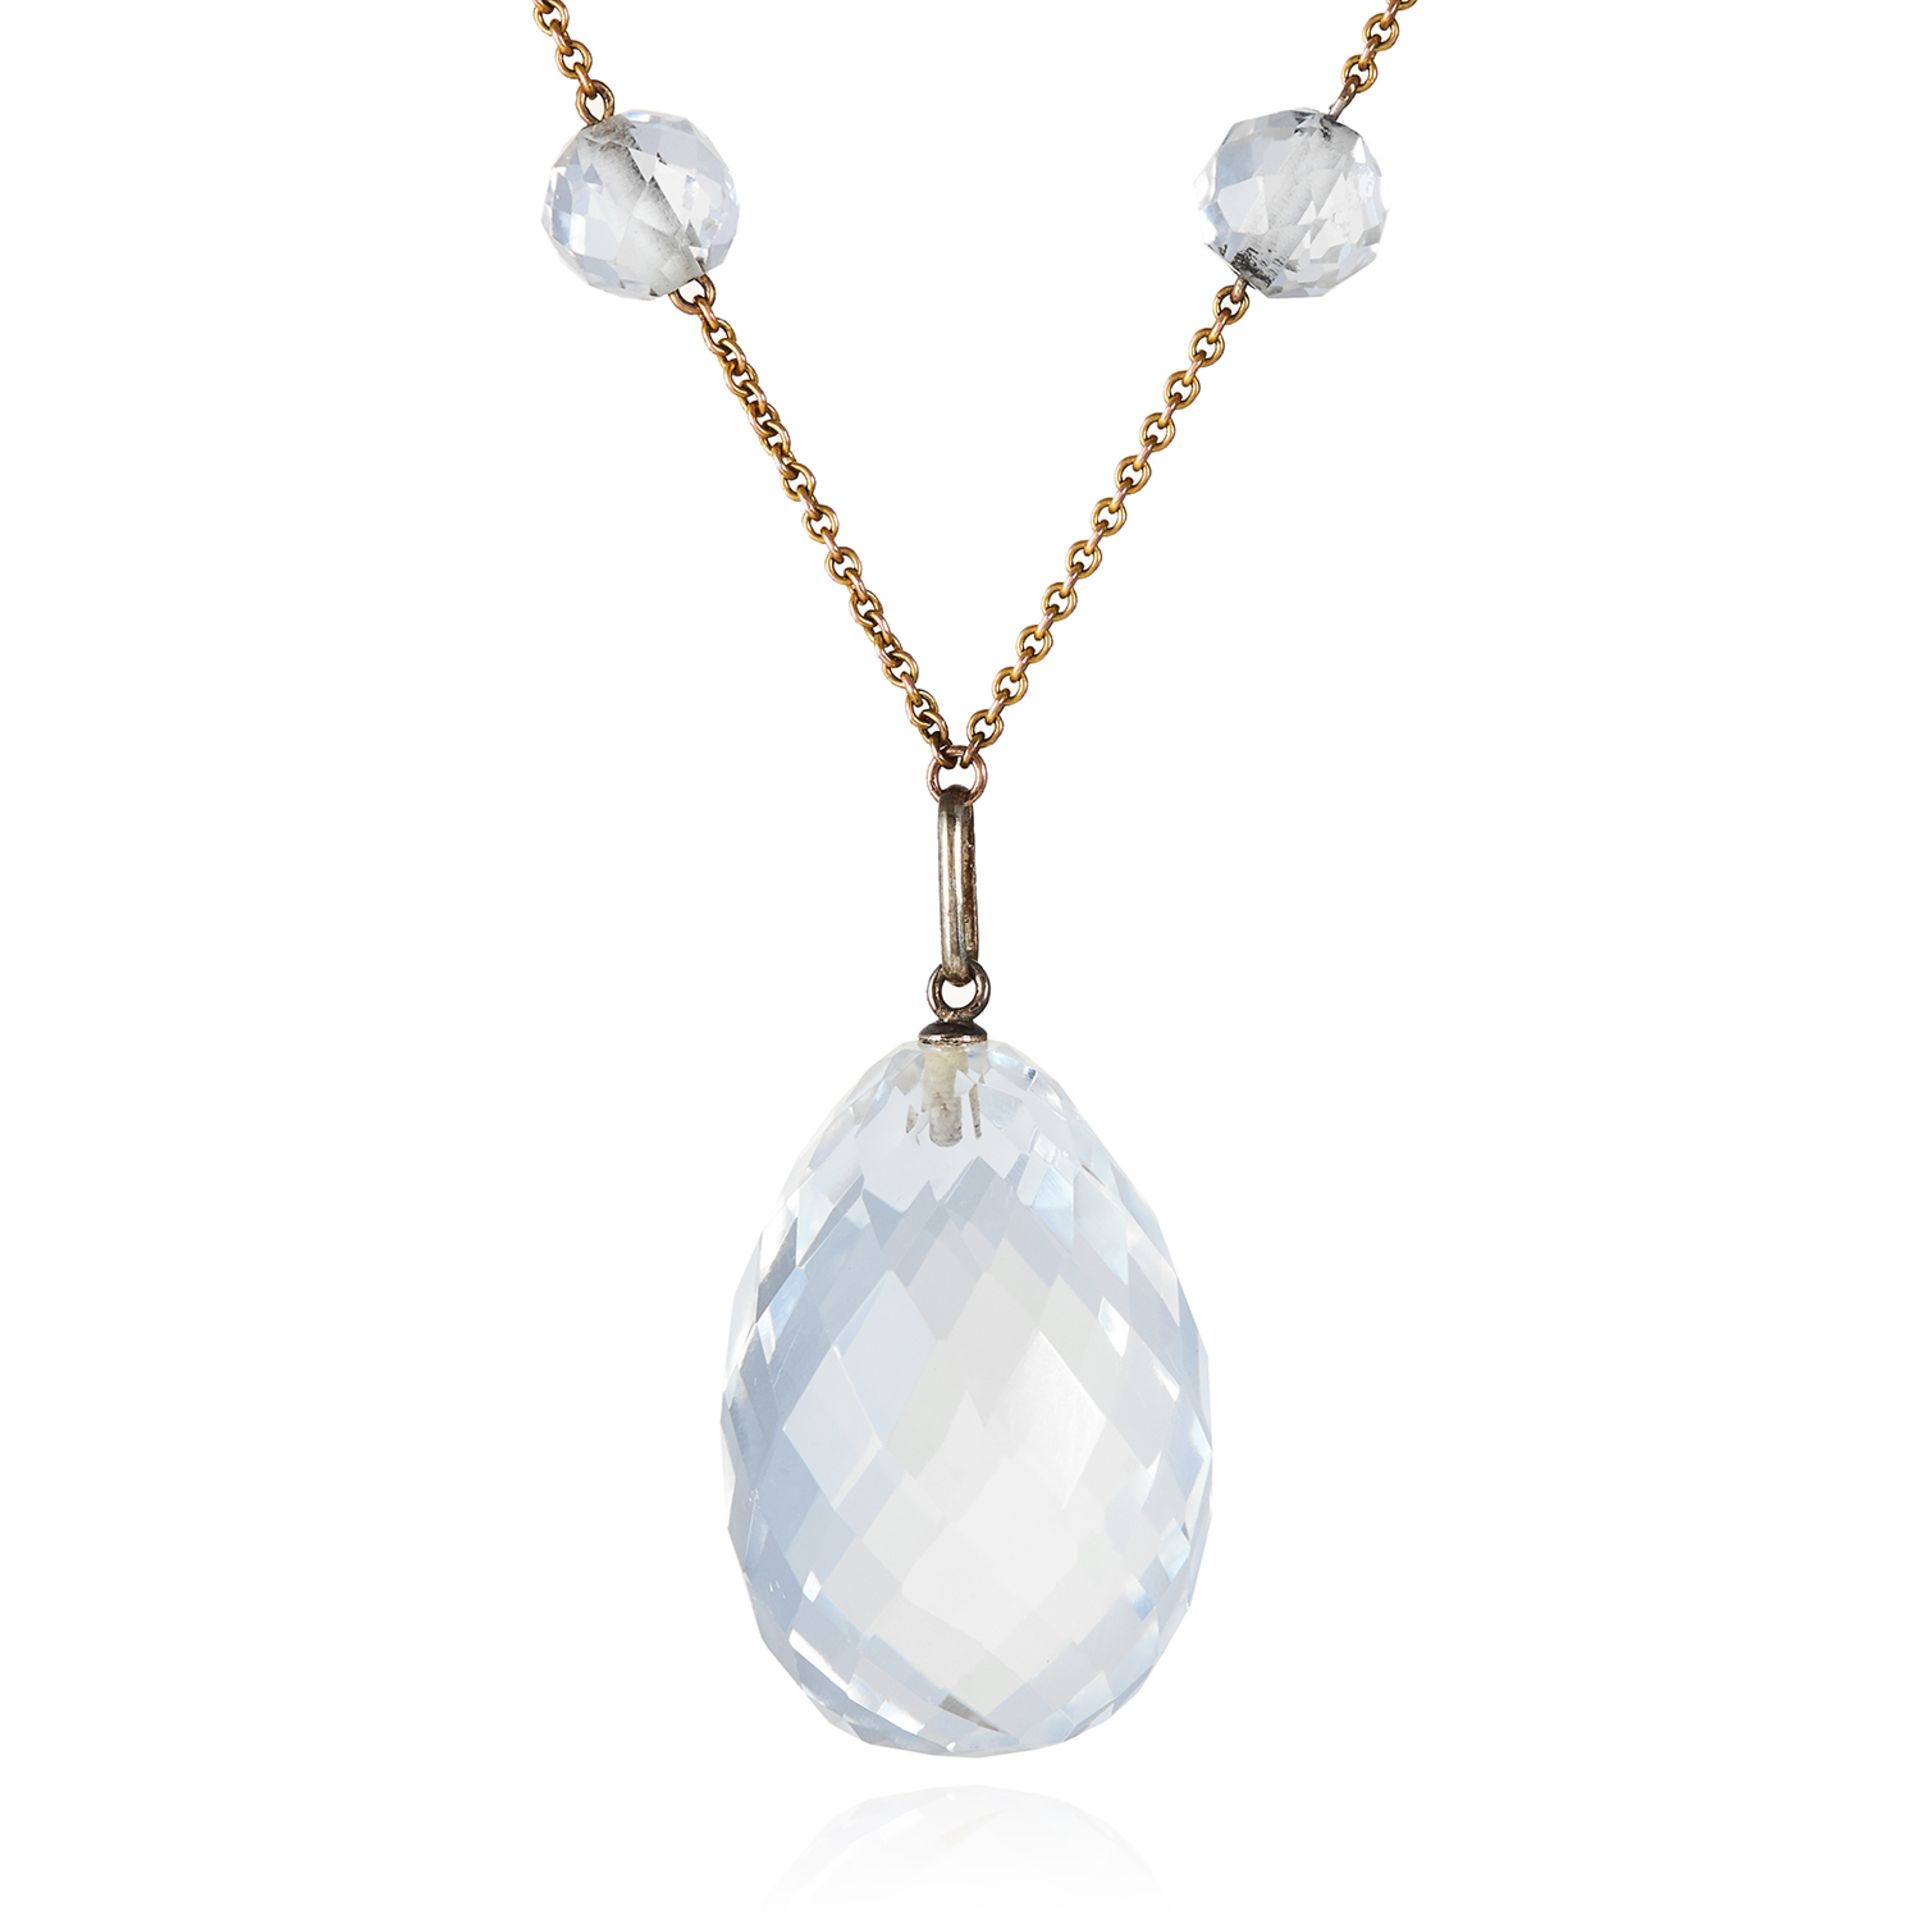 A ROCK CRYSTAL NECKLACE comprising of six faceted rock crystal beads suspending a large faceted rock